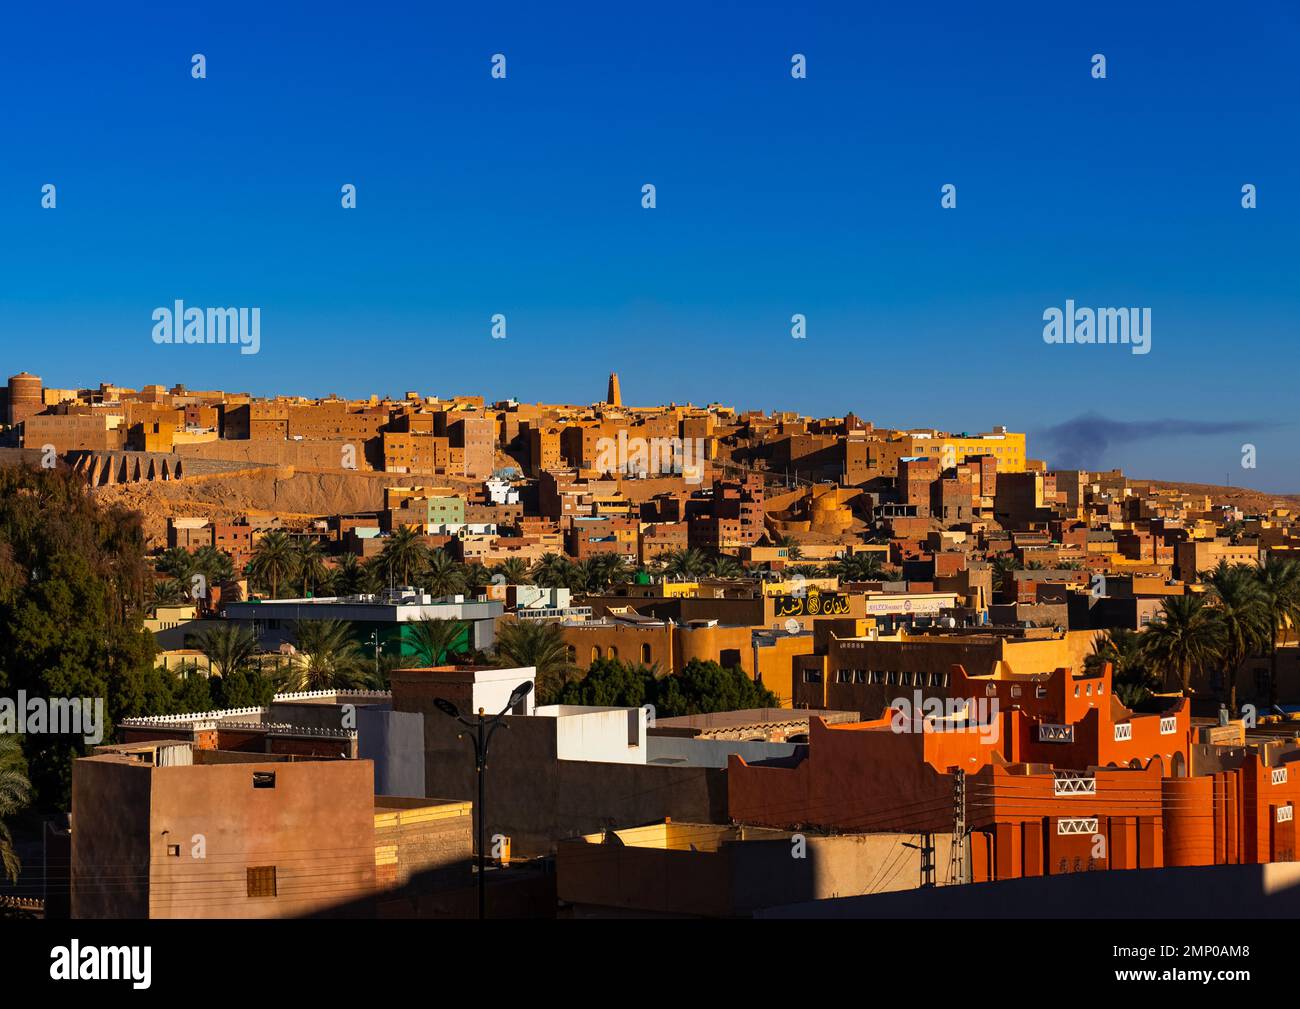 View of the old town with a minaret at the top, North Africa, Ghardaia, Algeria Stock Photo